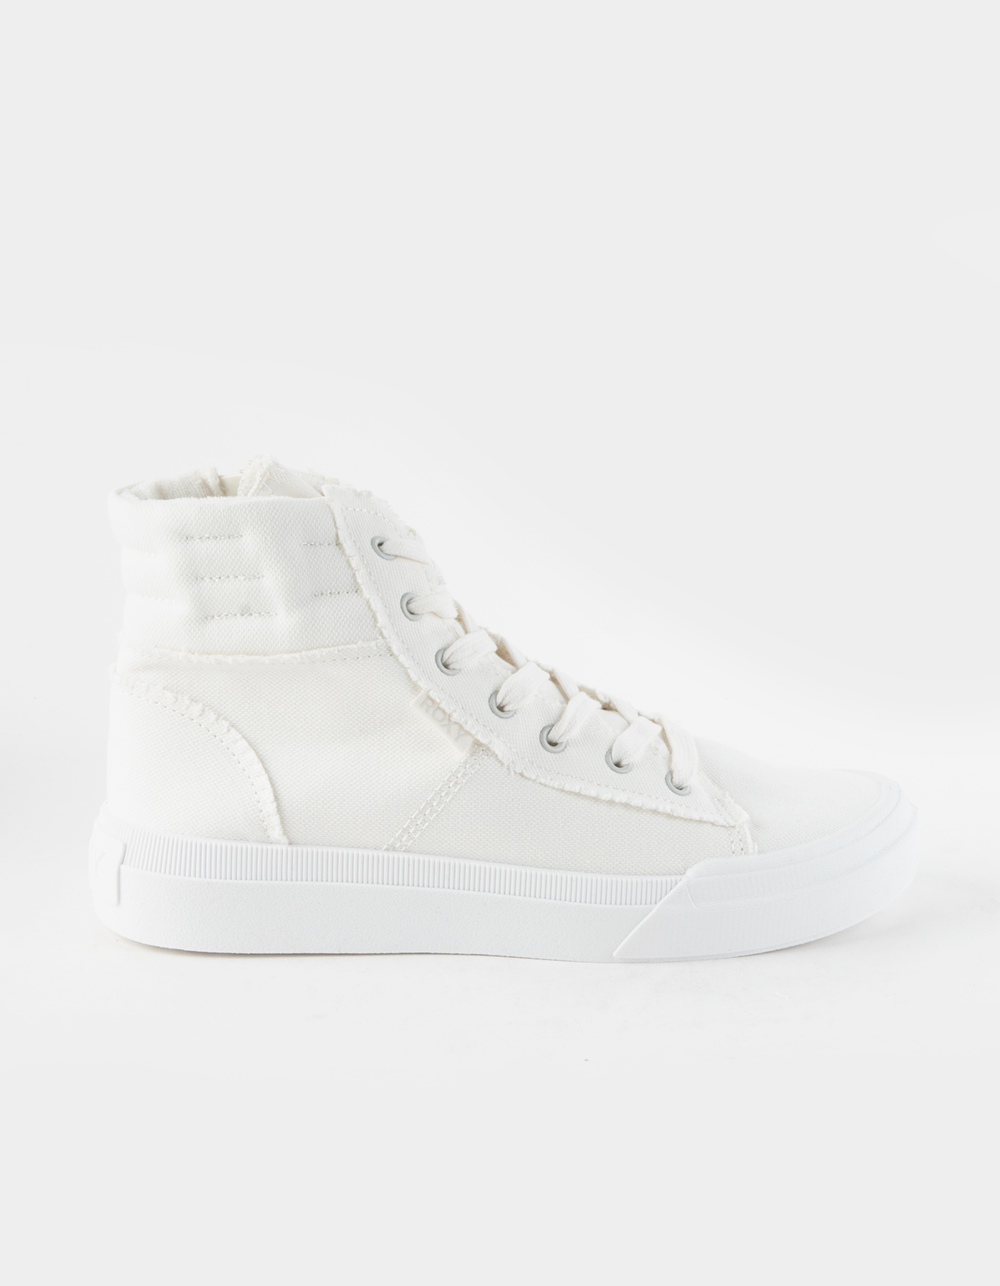 ROXY Rae Womens Mid-Top Lace-Up Shoes - WHITE | Tillys